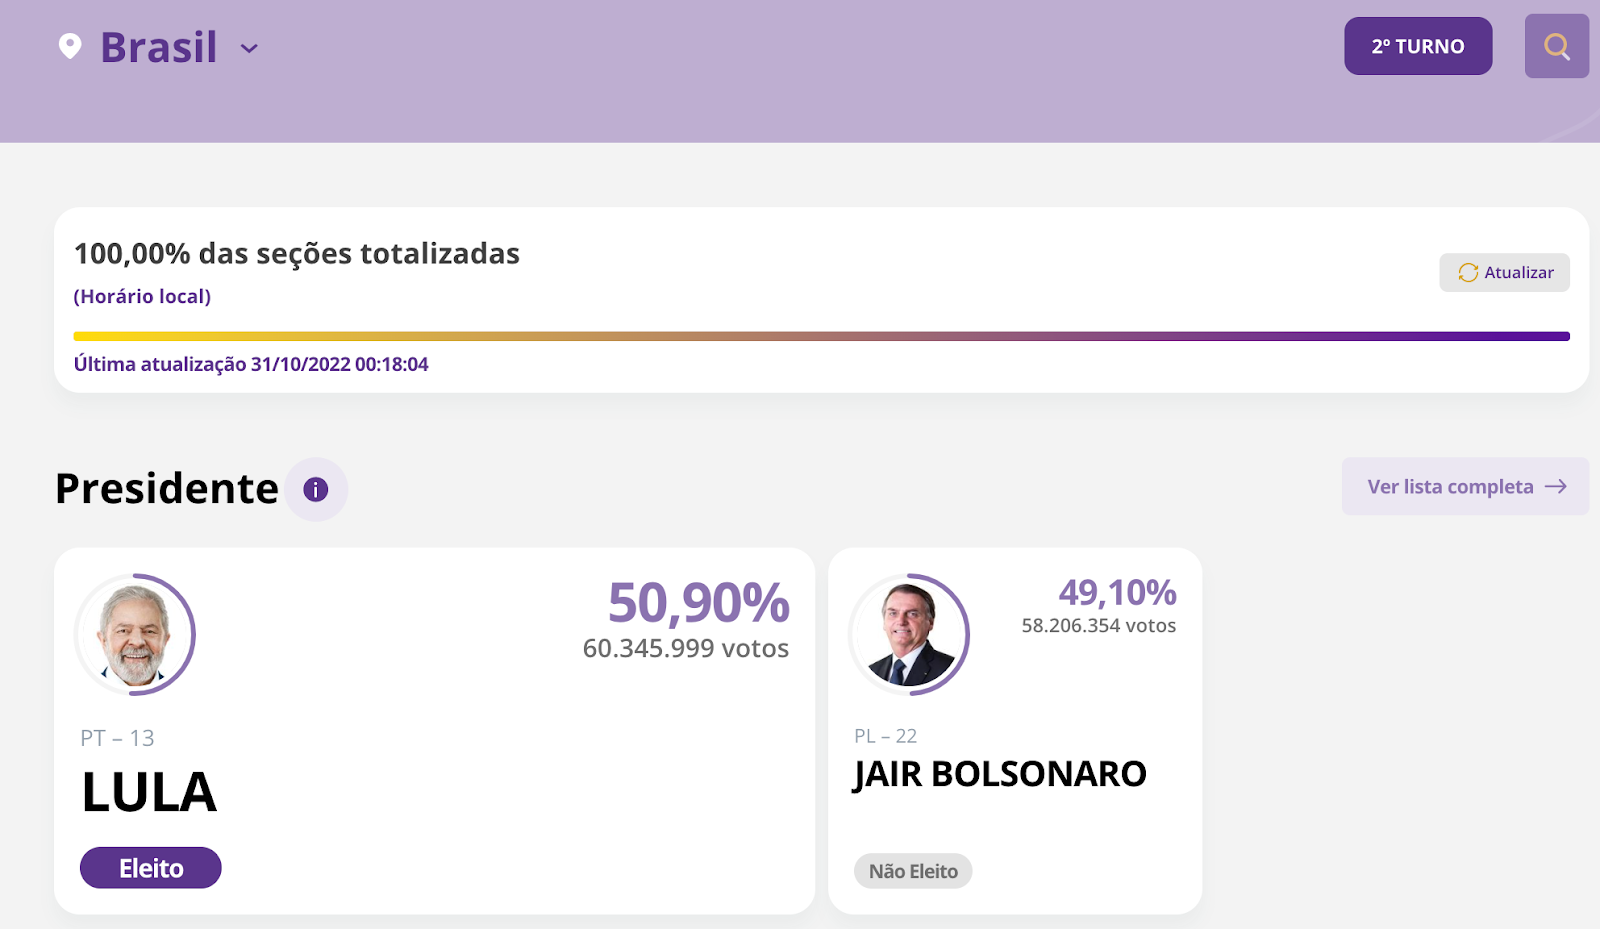 The final results of the elections as published by the official Tribunal Super Eleitoral, with more than 124 million votes counted.)